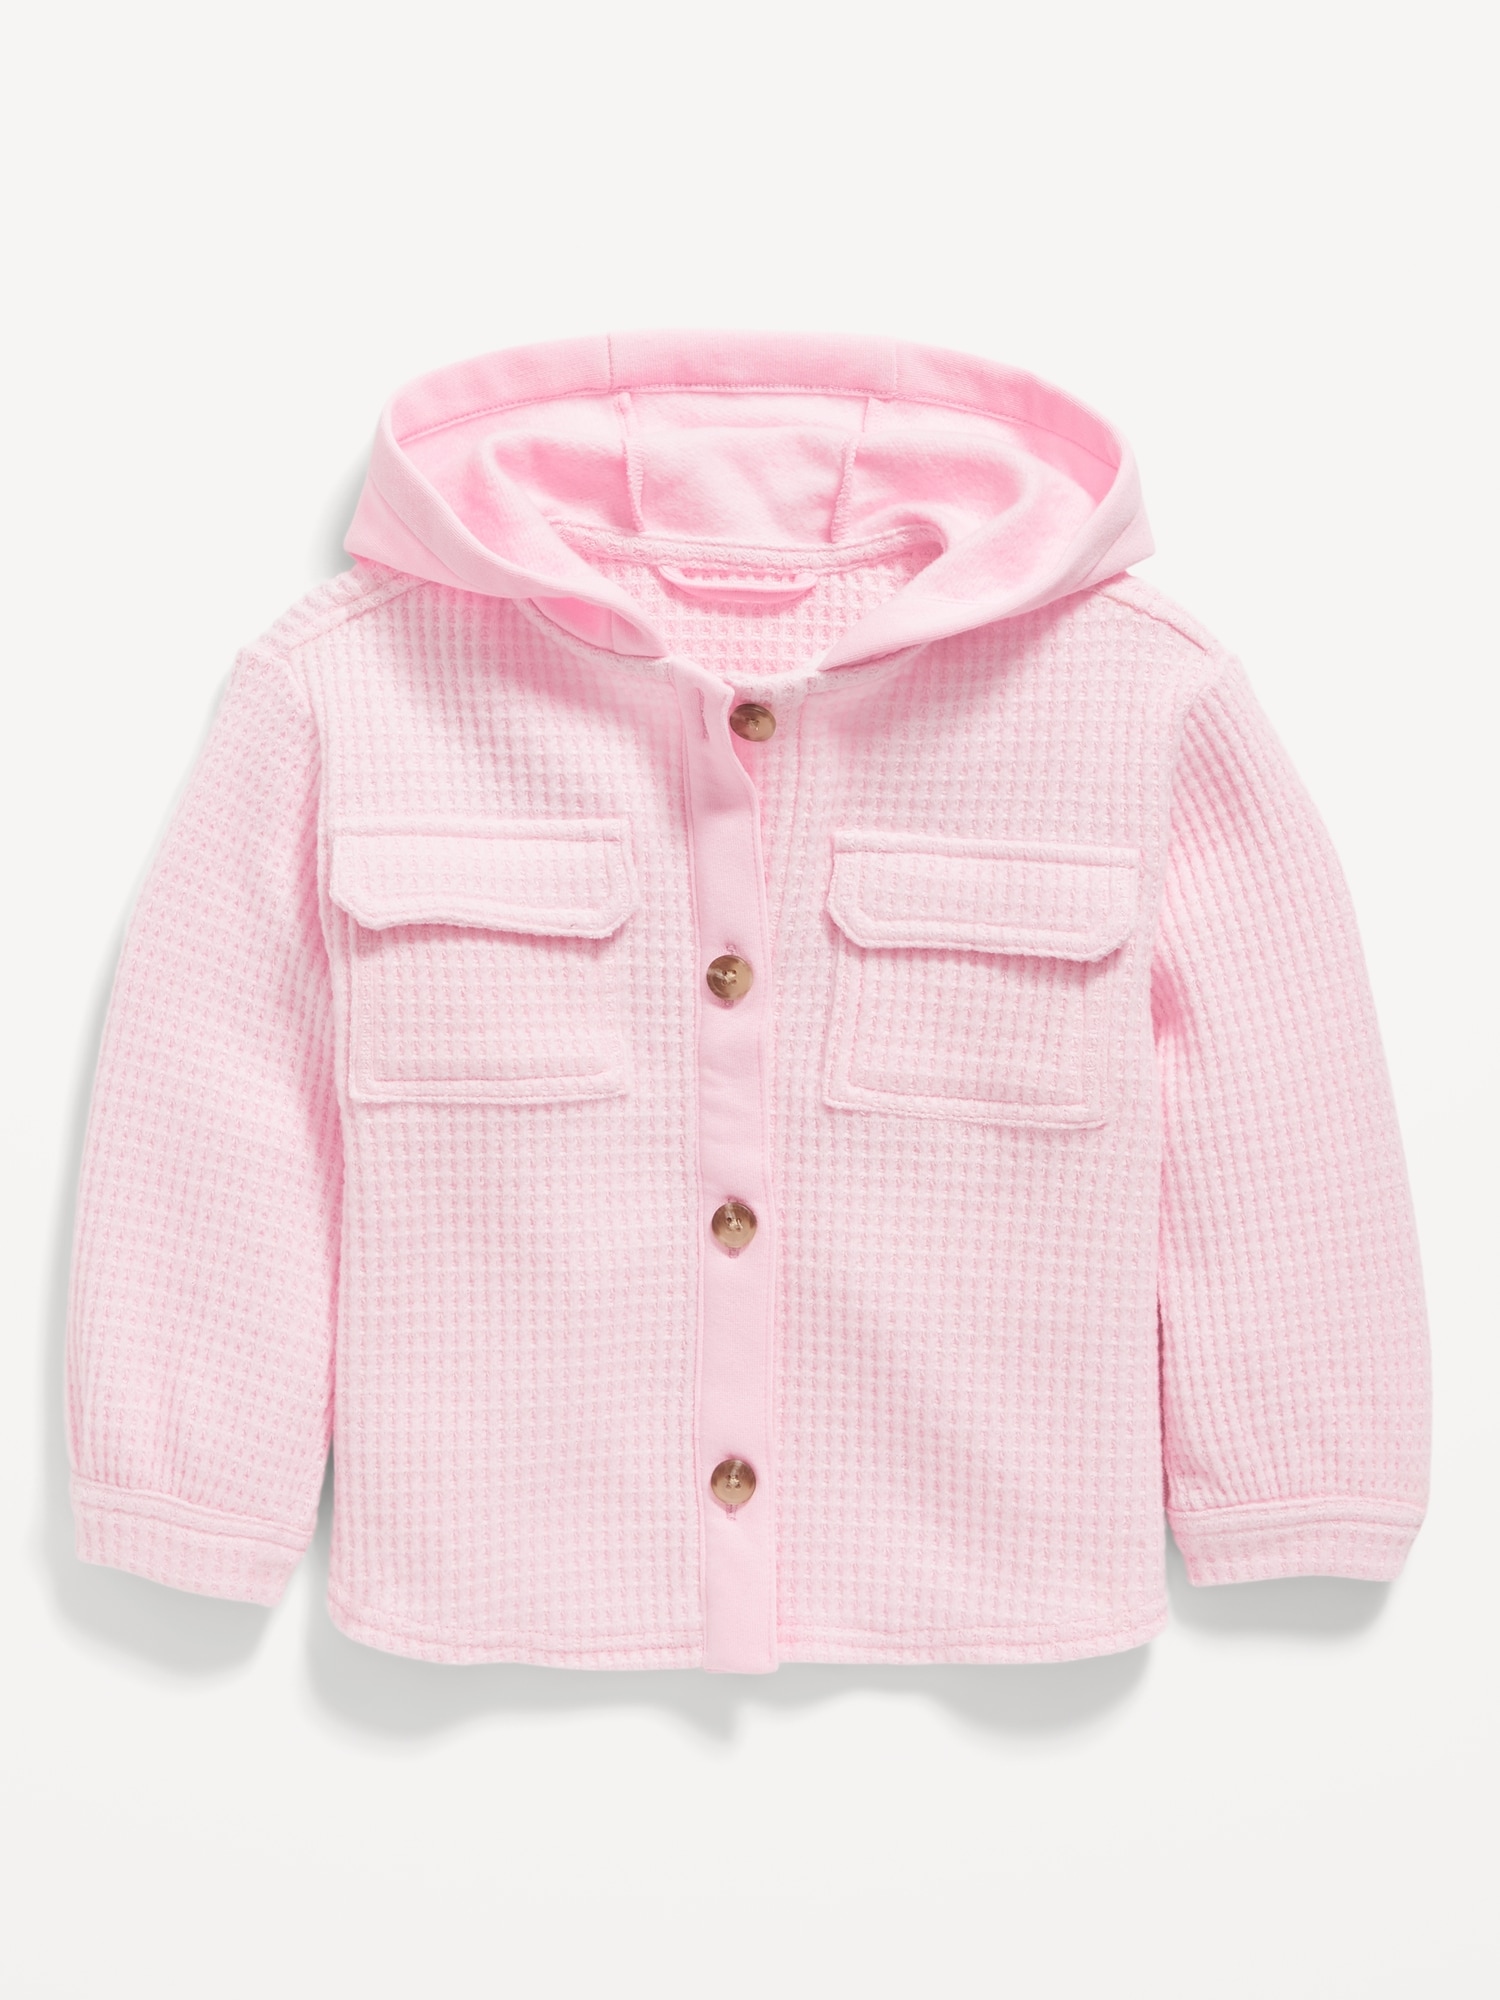 Thermal-Knit Pocket Button-Front Jacket for Toddler Girls